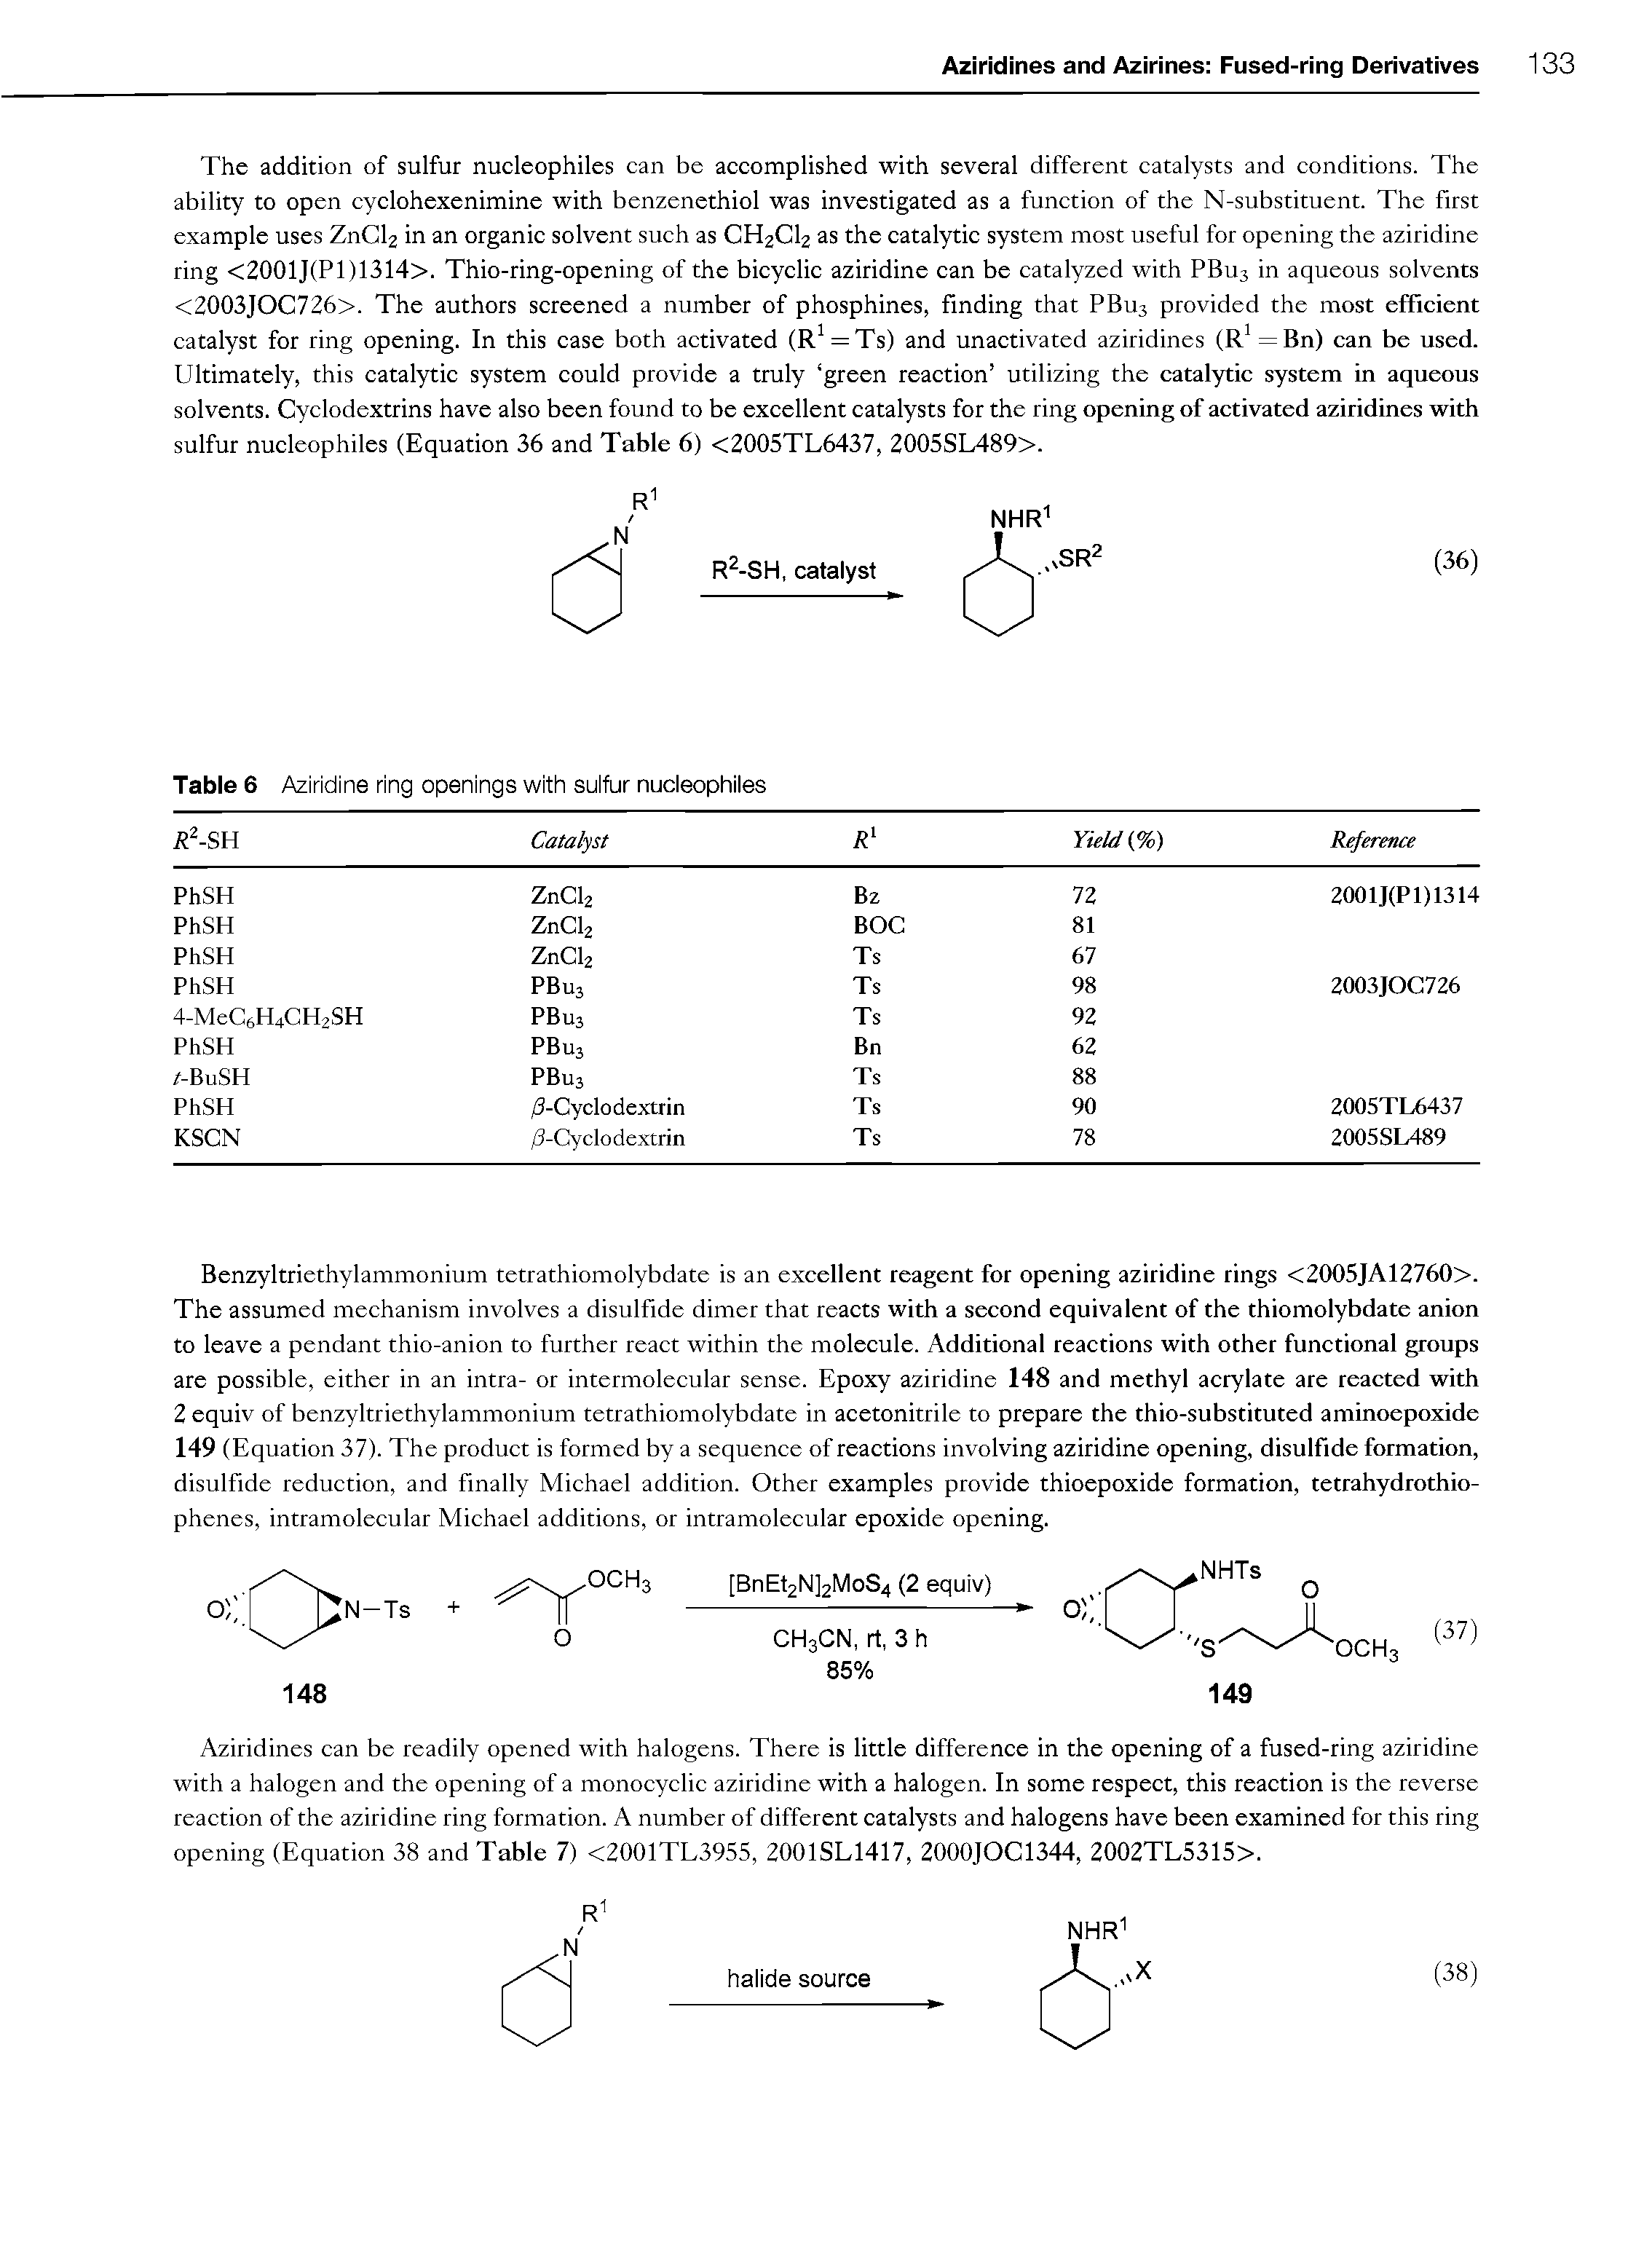 Table 6 Aziridine ring openings with suifur nucleophiles...